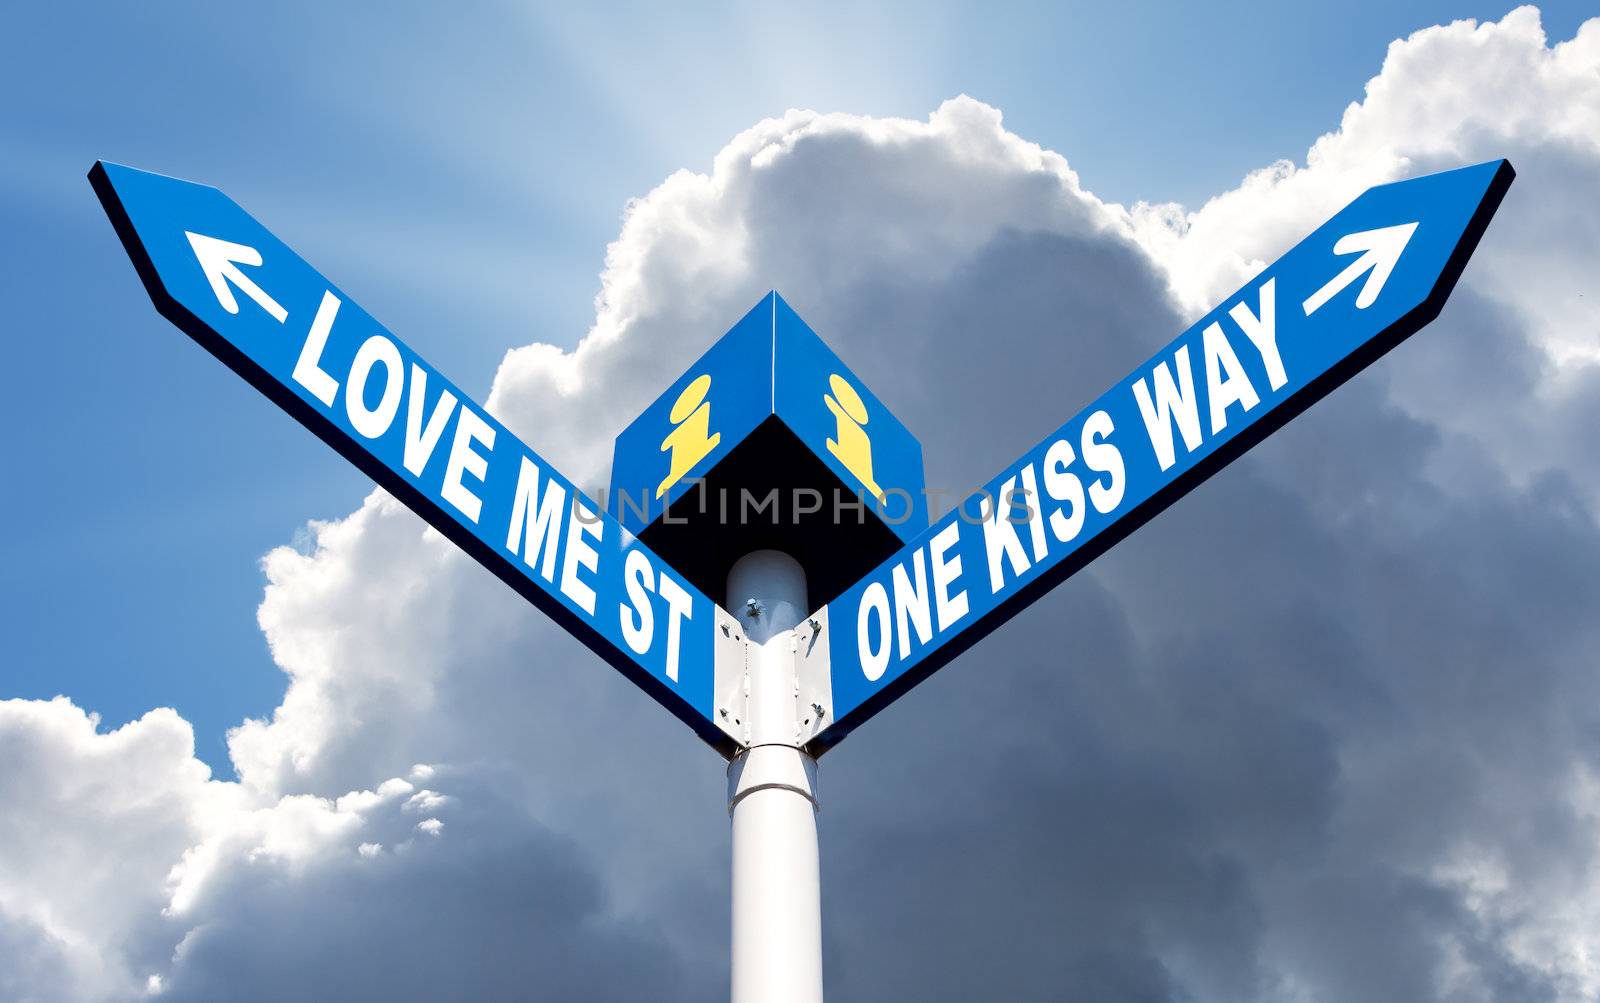 love me street and one kiss way direction post over cloudy sky